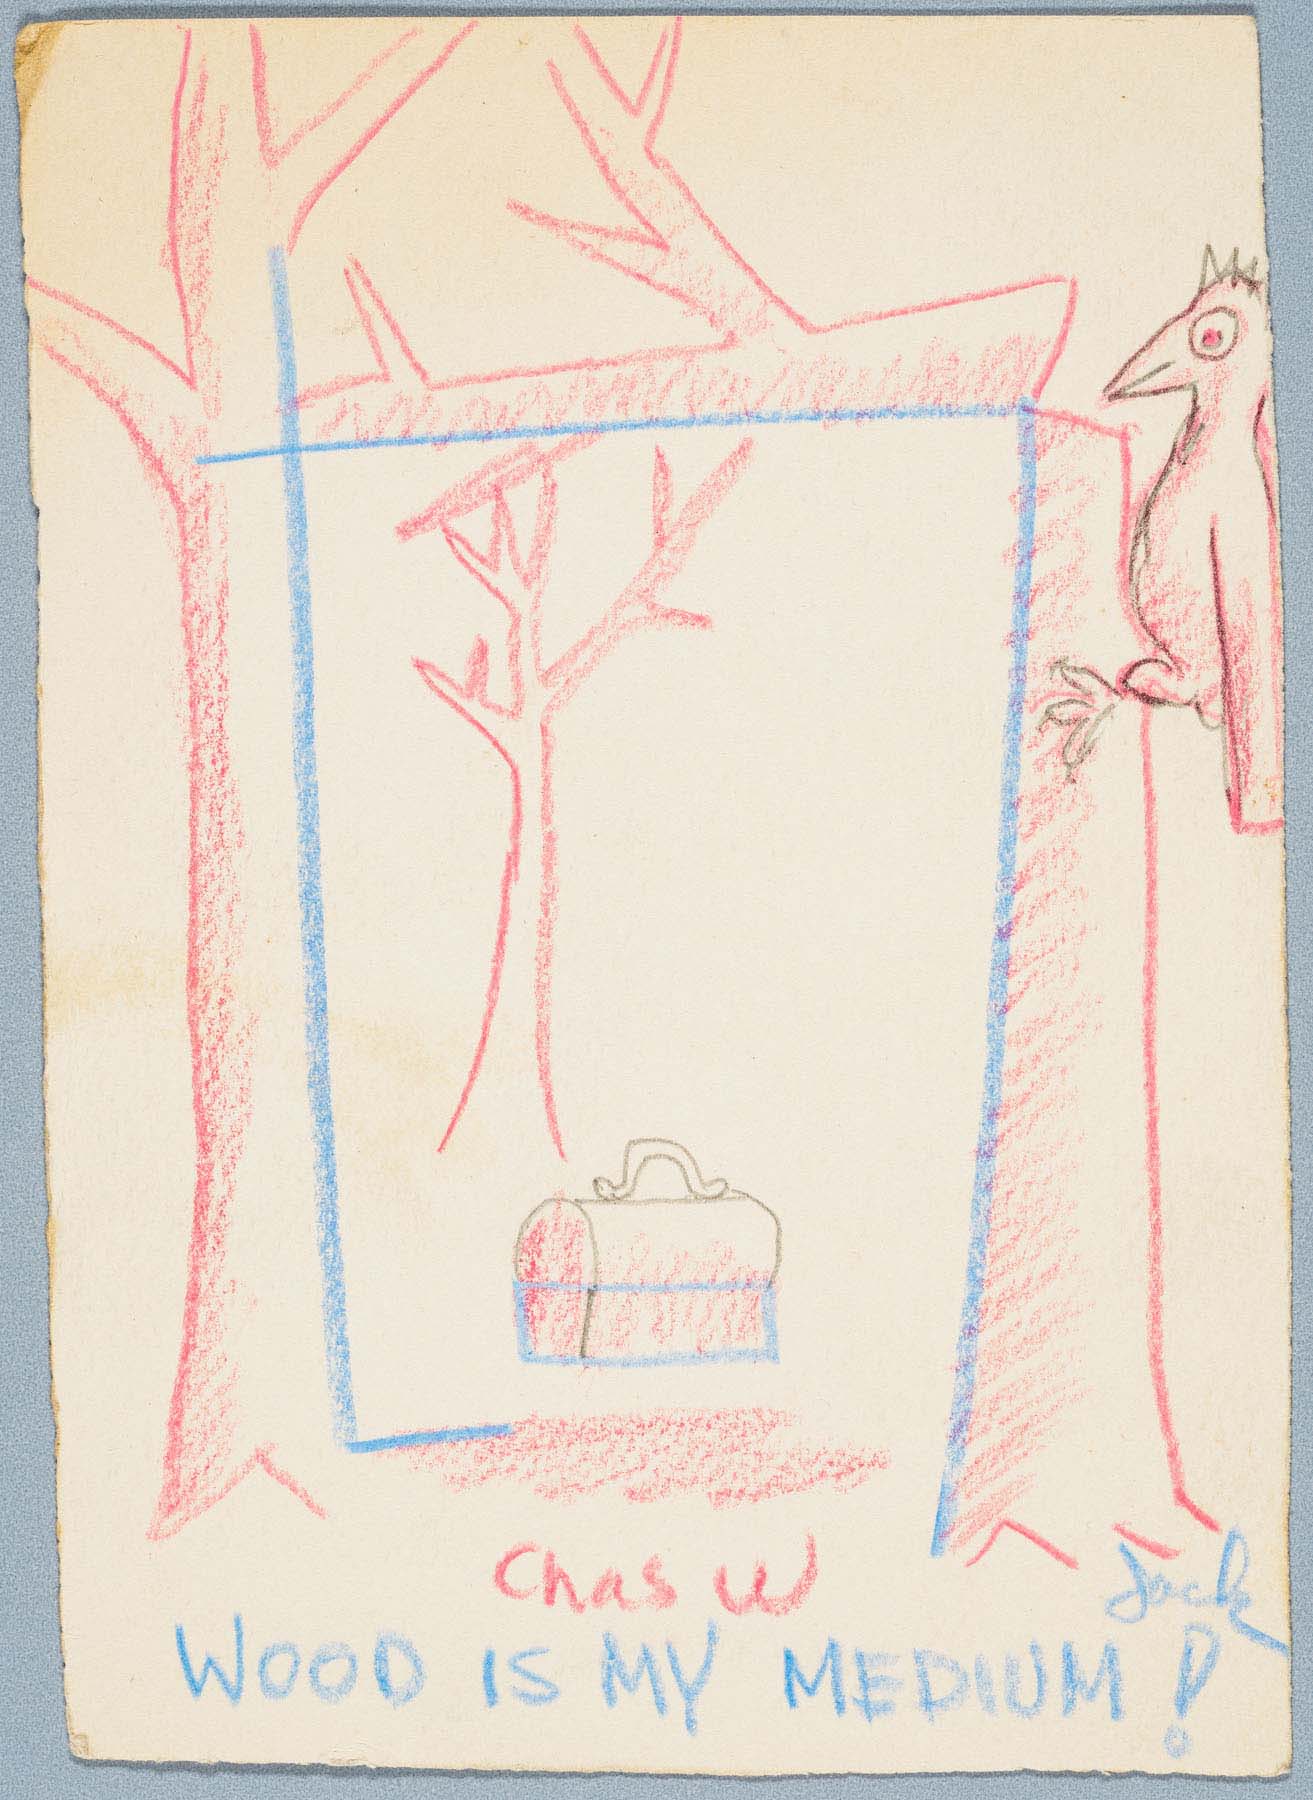 Red and blue pencil drawing of a bird pecking at a tree, the top of which is falling over to create a sort of frame around a lunchbox on the ground; “Wood is my medium!” is written in blue on the bottom.